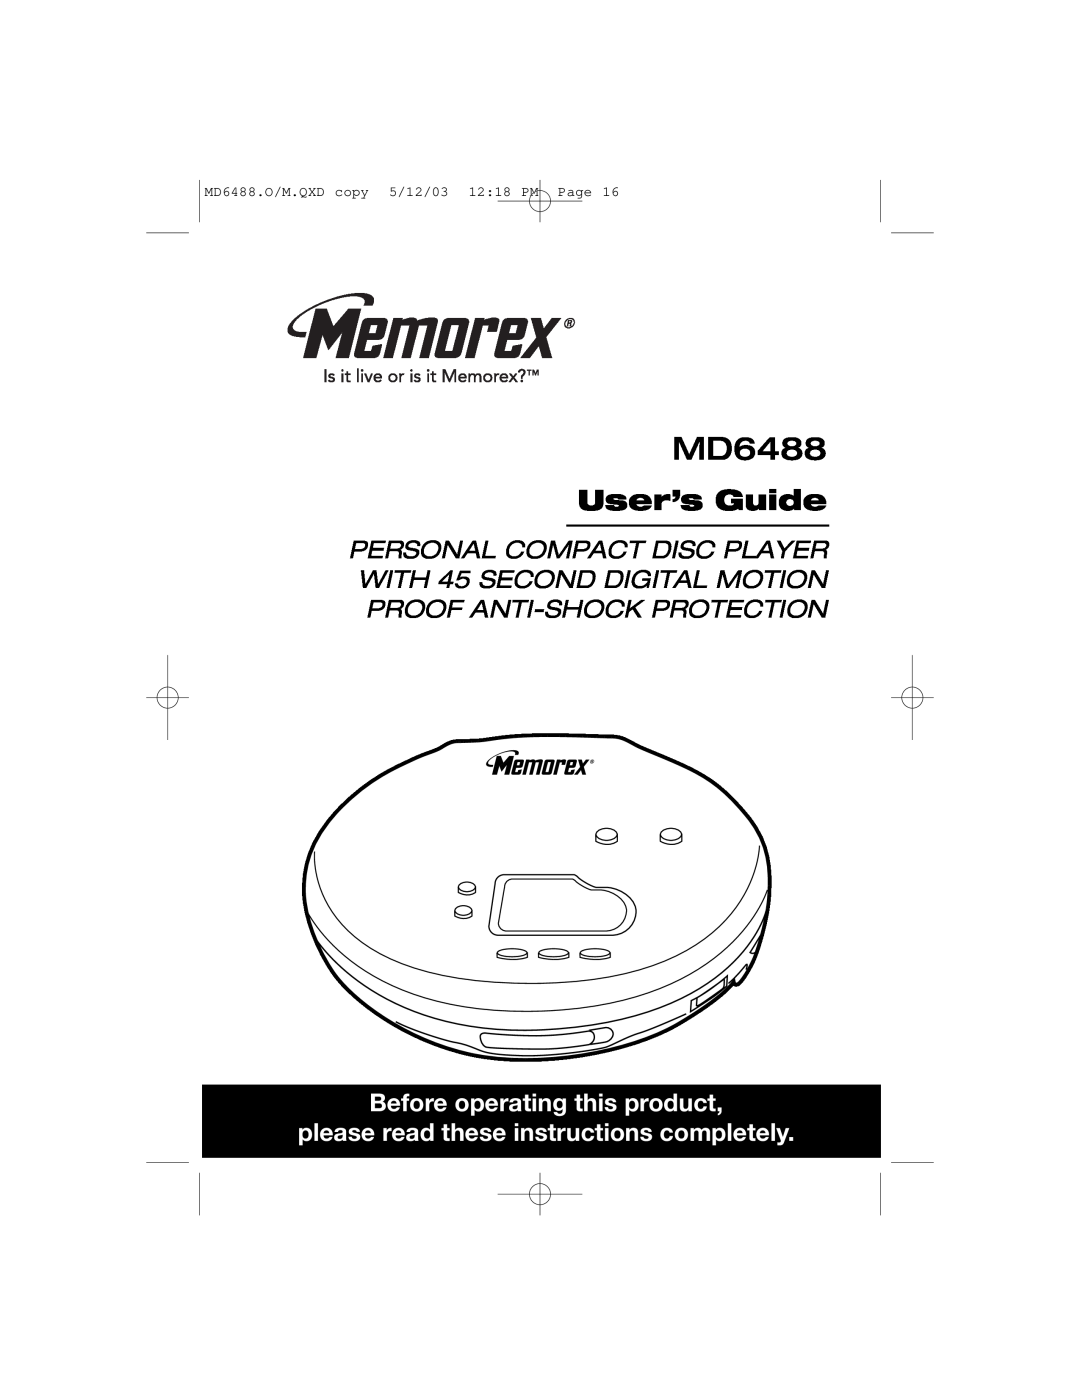 Memorex MD6488 manual Before operating this product, please read these instructions completely, User’s Guide 